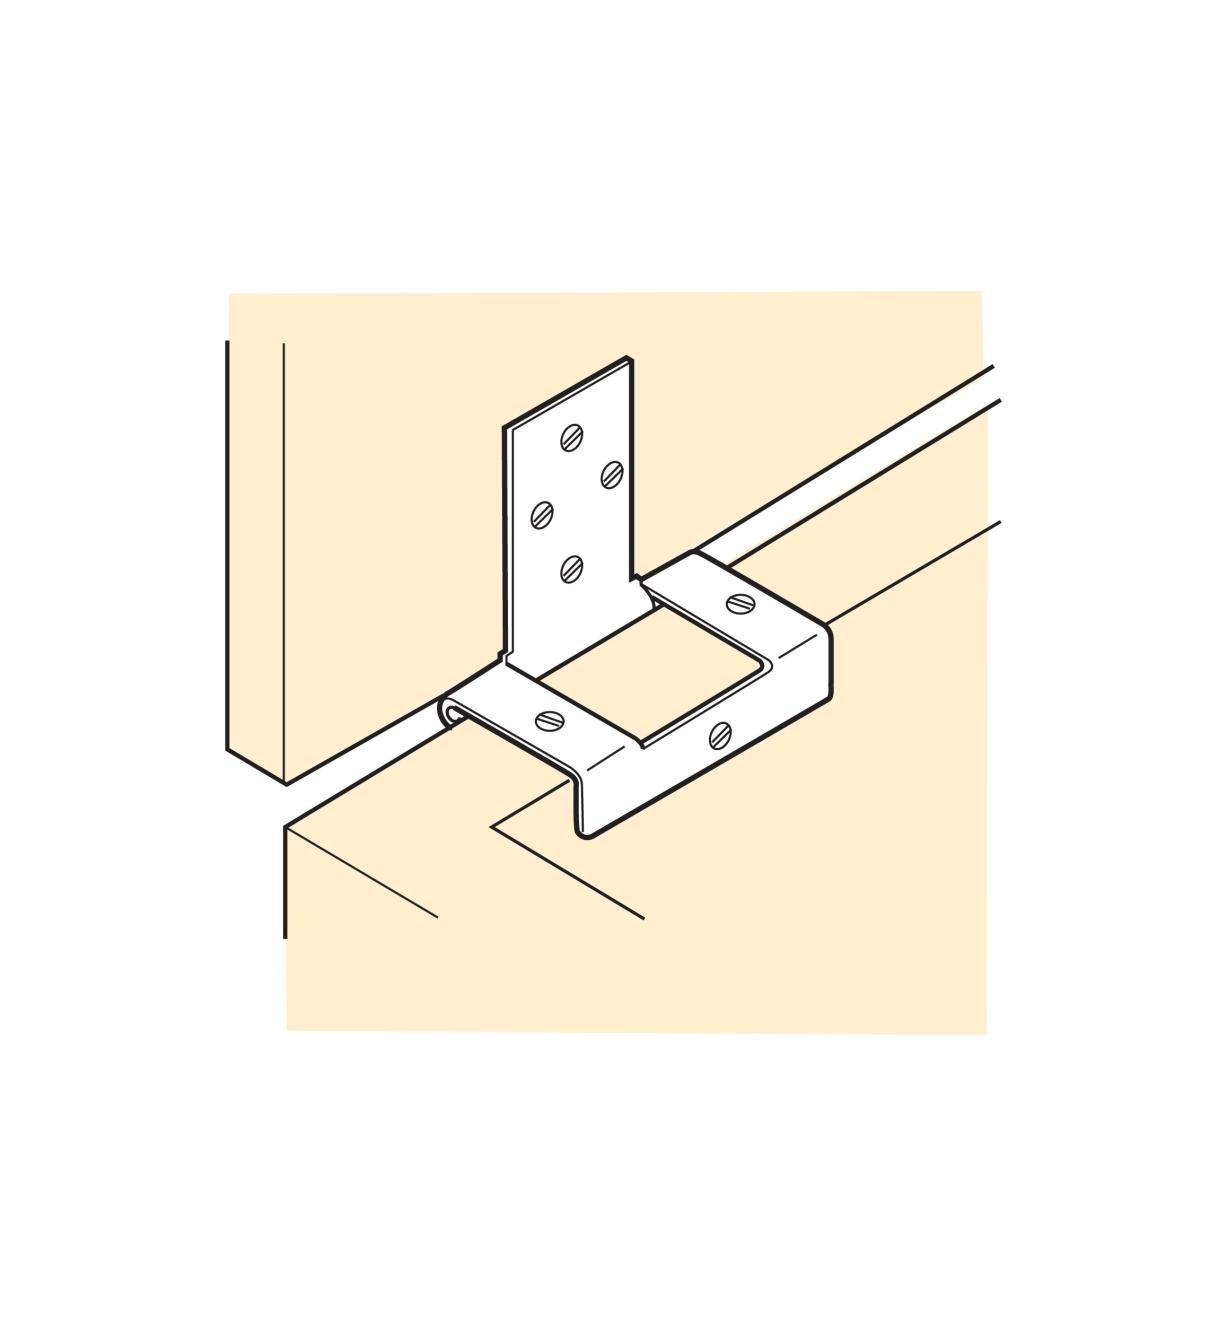 Illustration of a lid mounted with a No-Mortise Lid Hinge